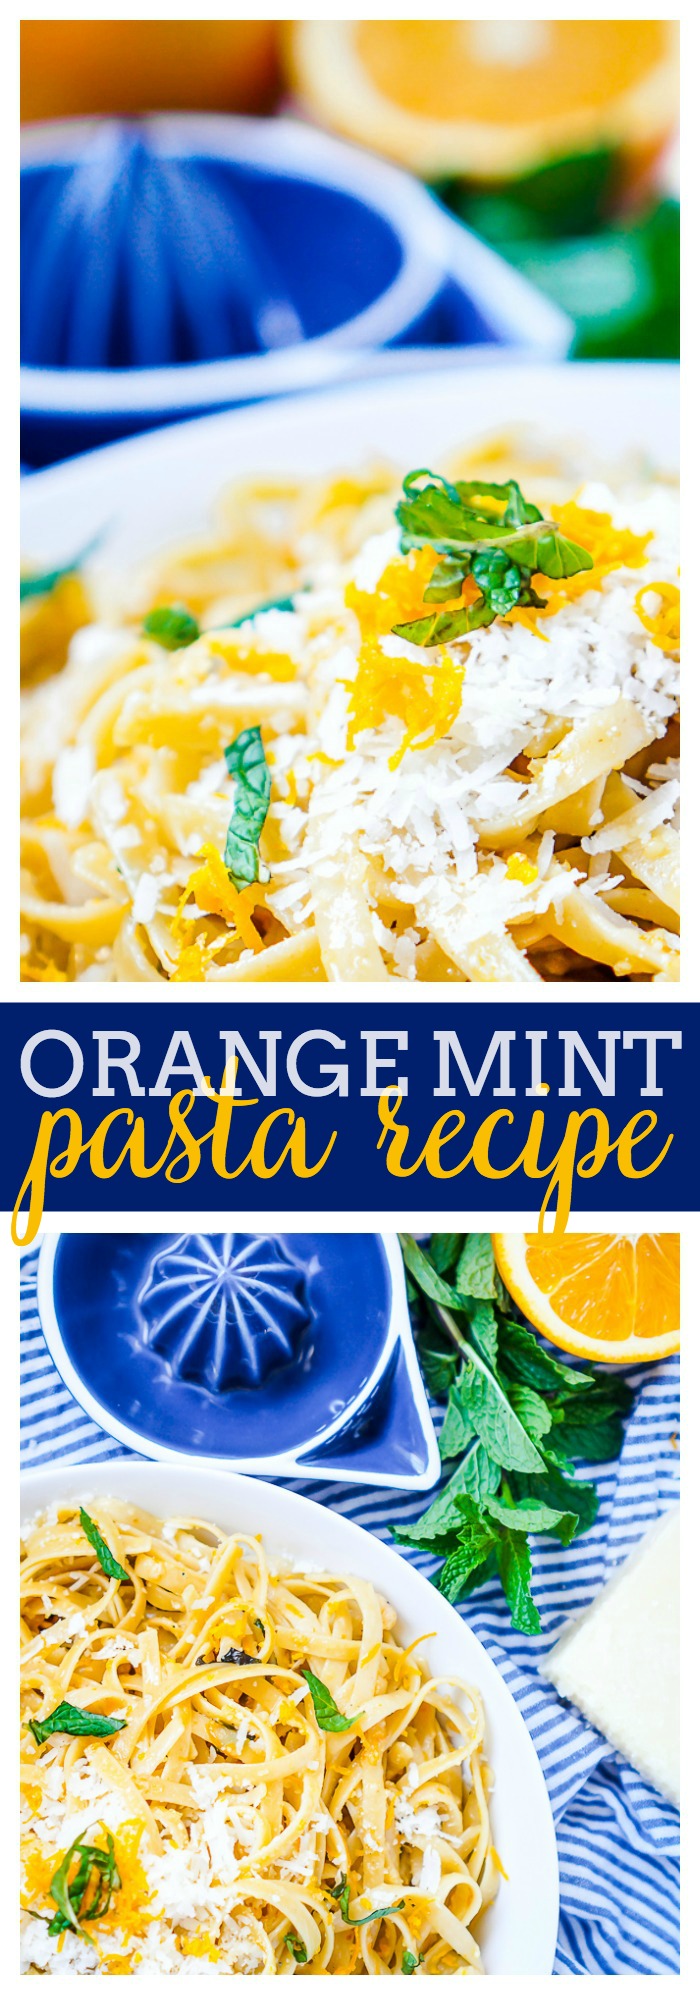 Orange Mint Pasta Recipe - This citrus pasta recipe is a refreshing and light dinner idea that makes the perfect spring pasta recipe and summer pasta recipe! Though I do love it all year long as dinner and side dish! | The Love Nerds